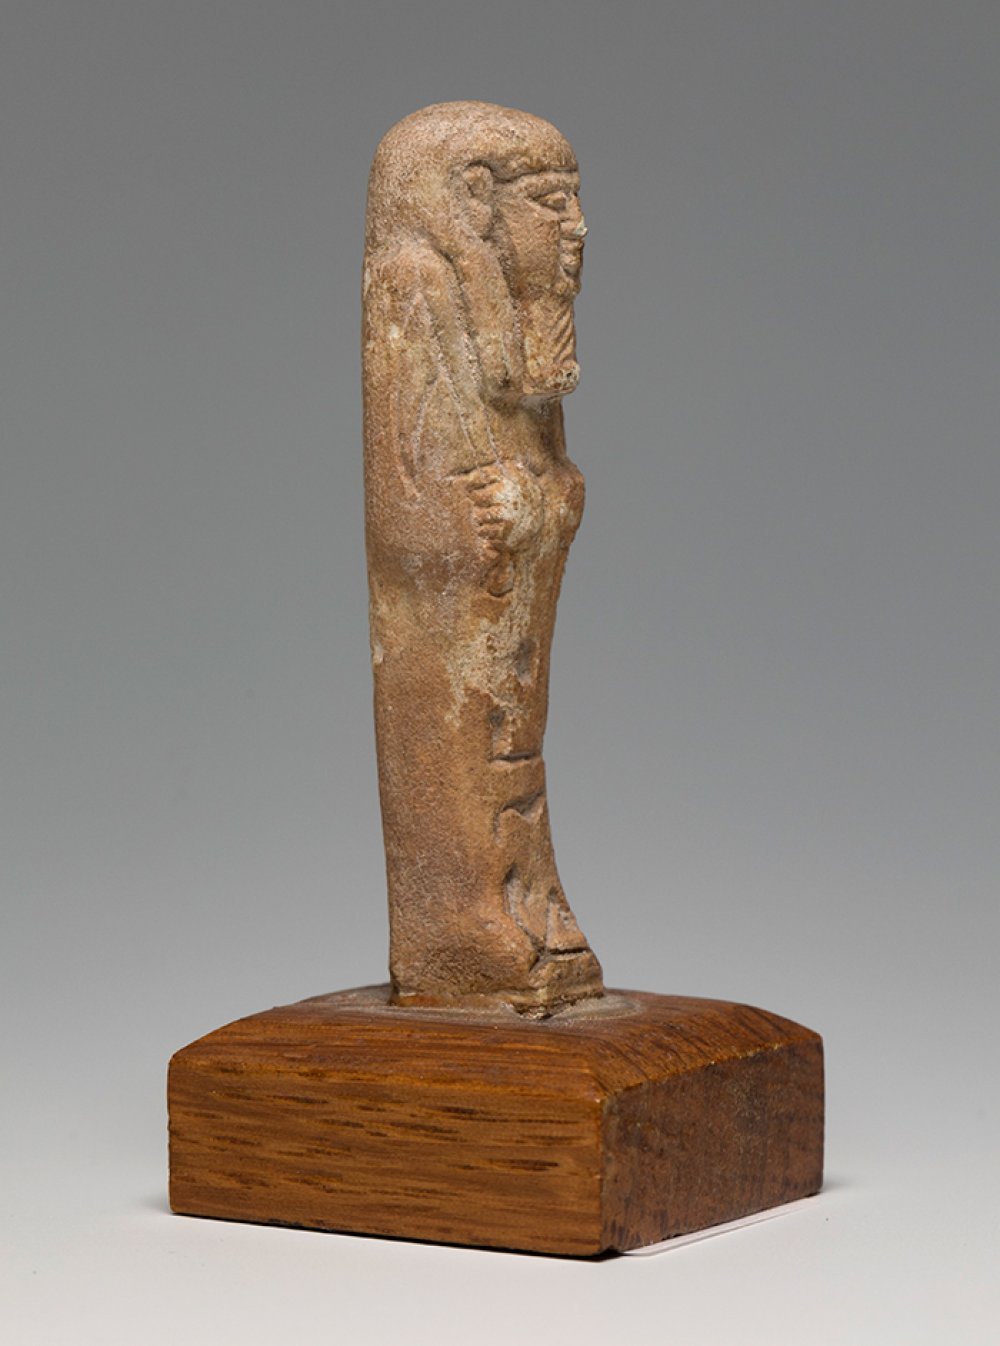 Ushebti; Egypt, Lower Egypt, Ptolemaic period, 2nd-1st century BC.Brown faience. Wooden base. - Image 3 of 4